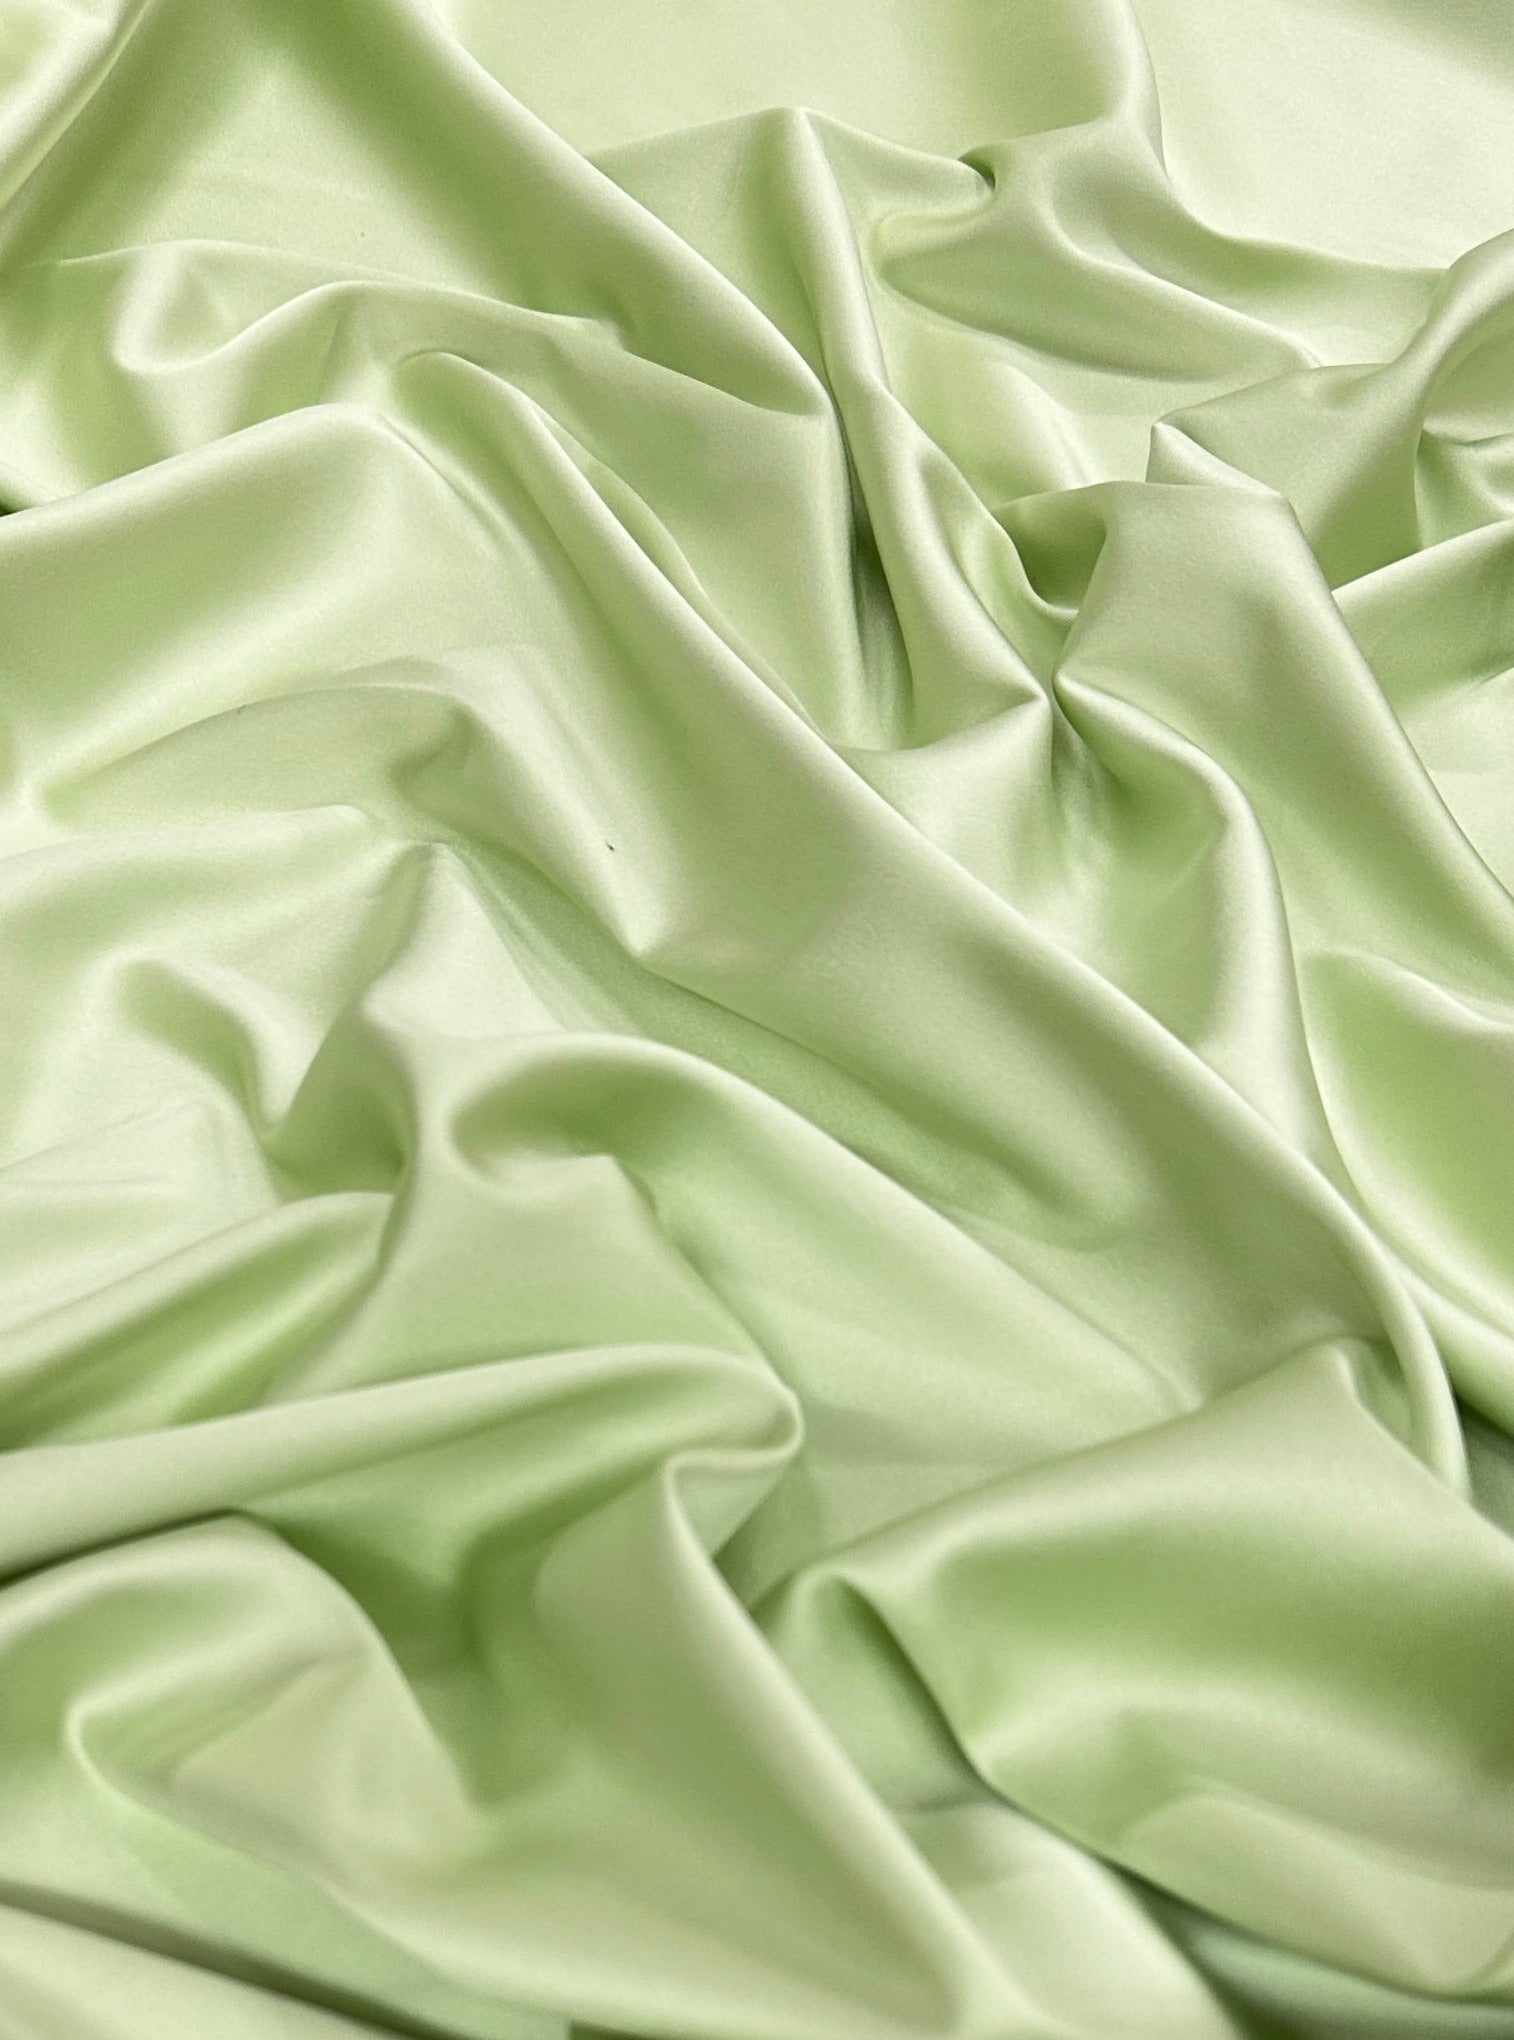 shiny silk fabric, solid silk, solid satin, stretch silk charmeuse, silk fabric by the yard, natural silk, pure silk, 100% pure silk, natural fabric, kiki textiles, online fabric store usa, luxurious fabric, silk satin online, fancy silk, soft silk, smooth silk, 100% natural silk, charmeuse satin, green natural silk, green silk, pistachio natural silk, pistachio silk, green natural stretch silk, pistachio silk, pistachio silk, baby pink silk, green silk satin, pistachio silk satin, light green silk